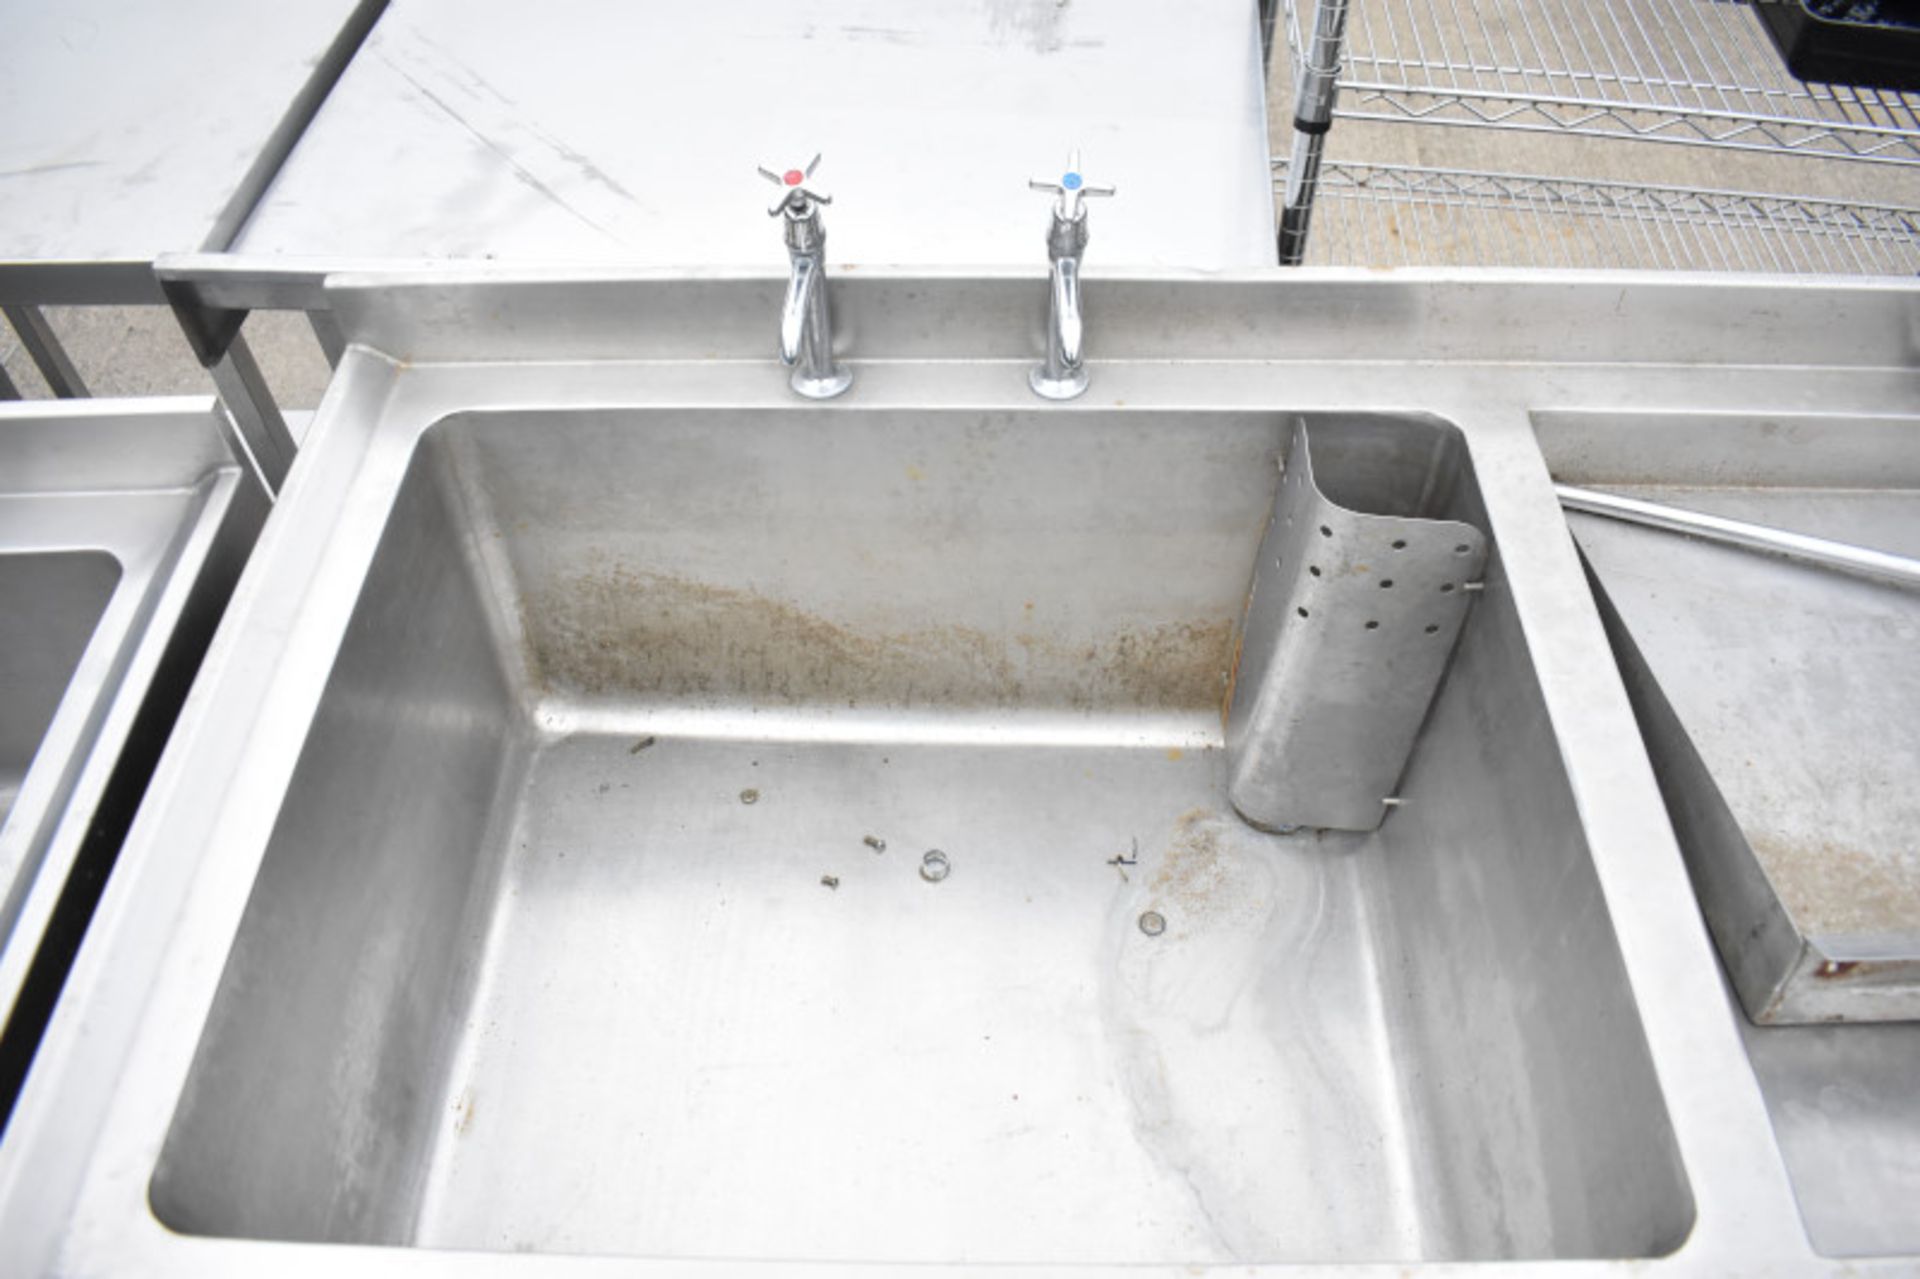 Stainless steel Double drainer Prep Sink Unit L 2700mm x D 750mm x H 950mm - Image 5 of 5